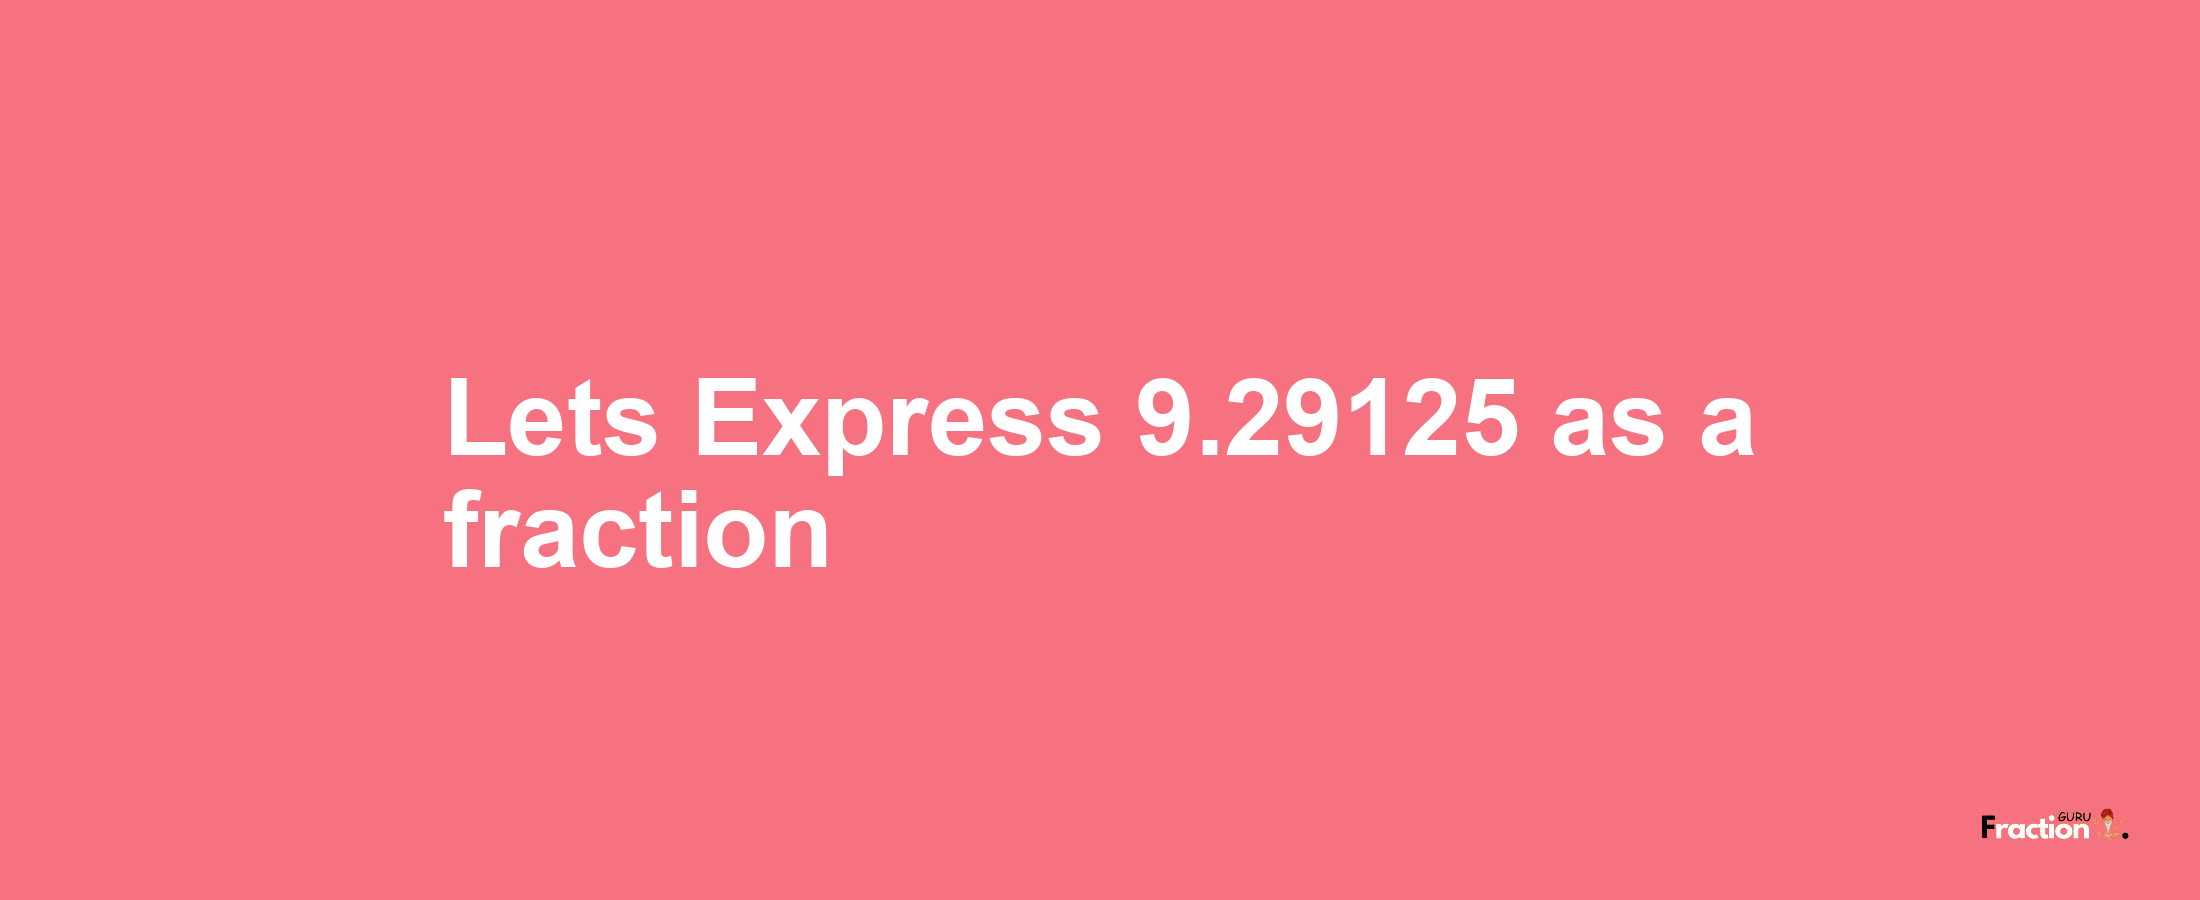 Lets Express 9.29125 as afraction